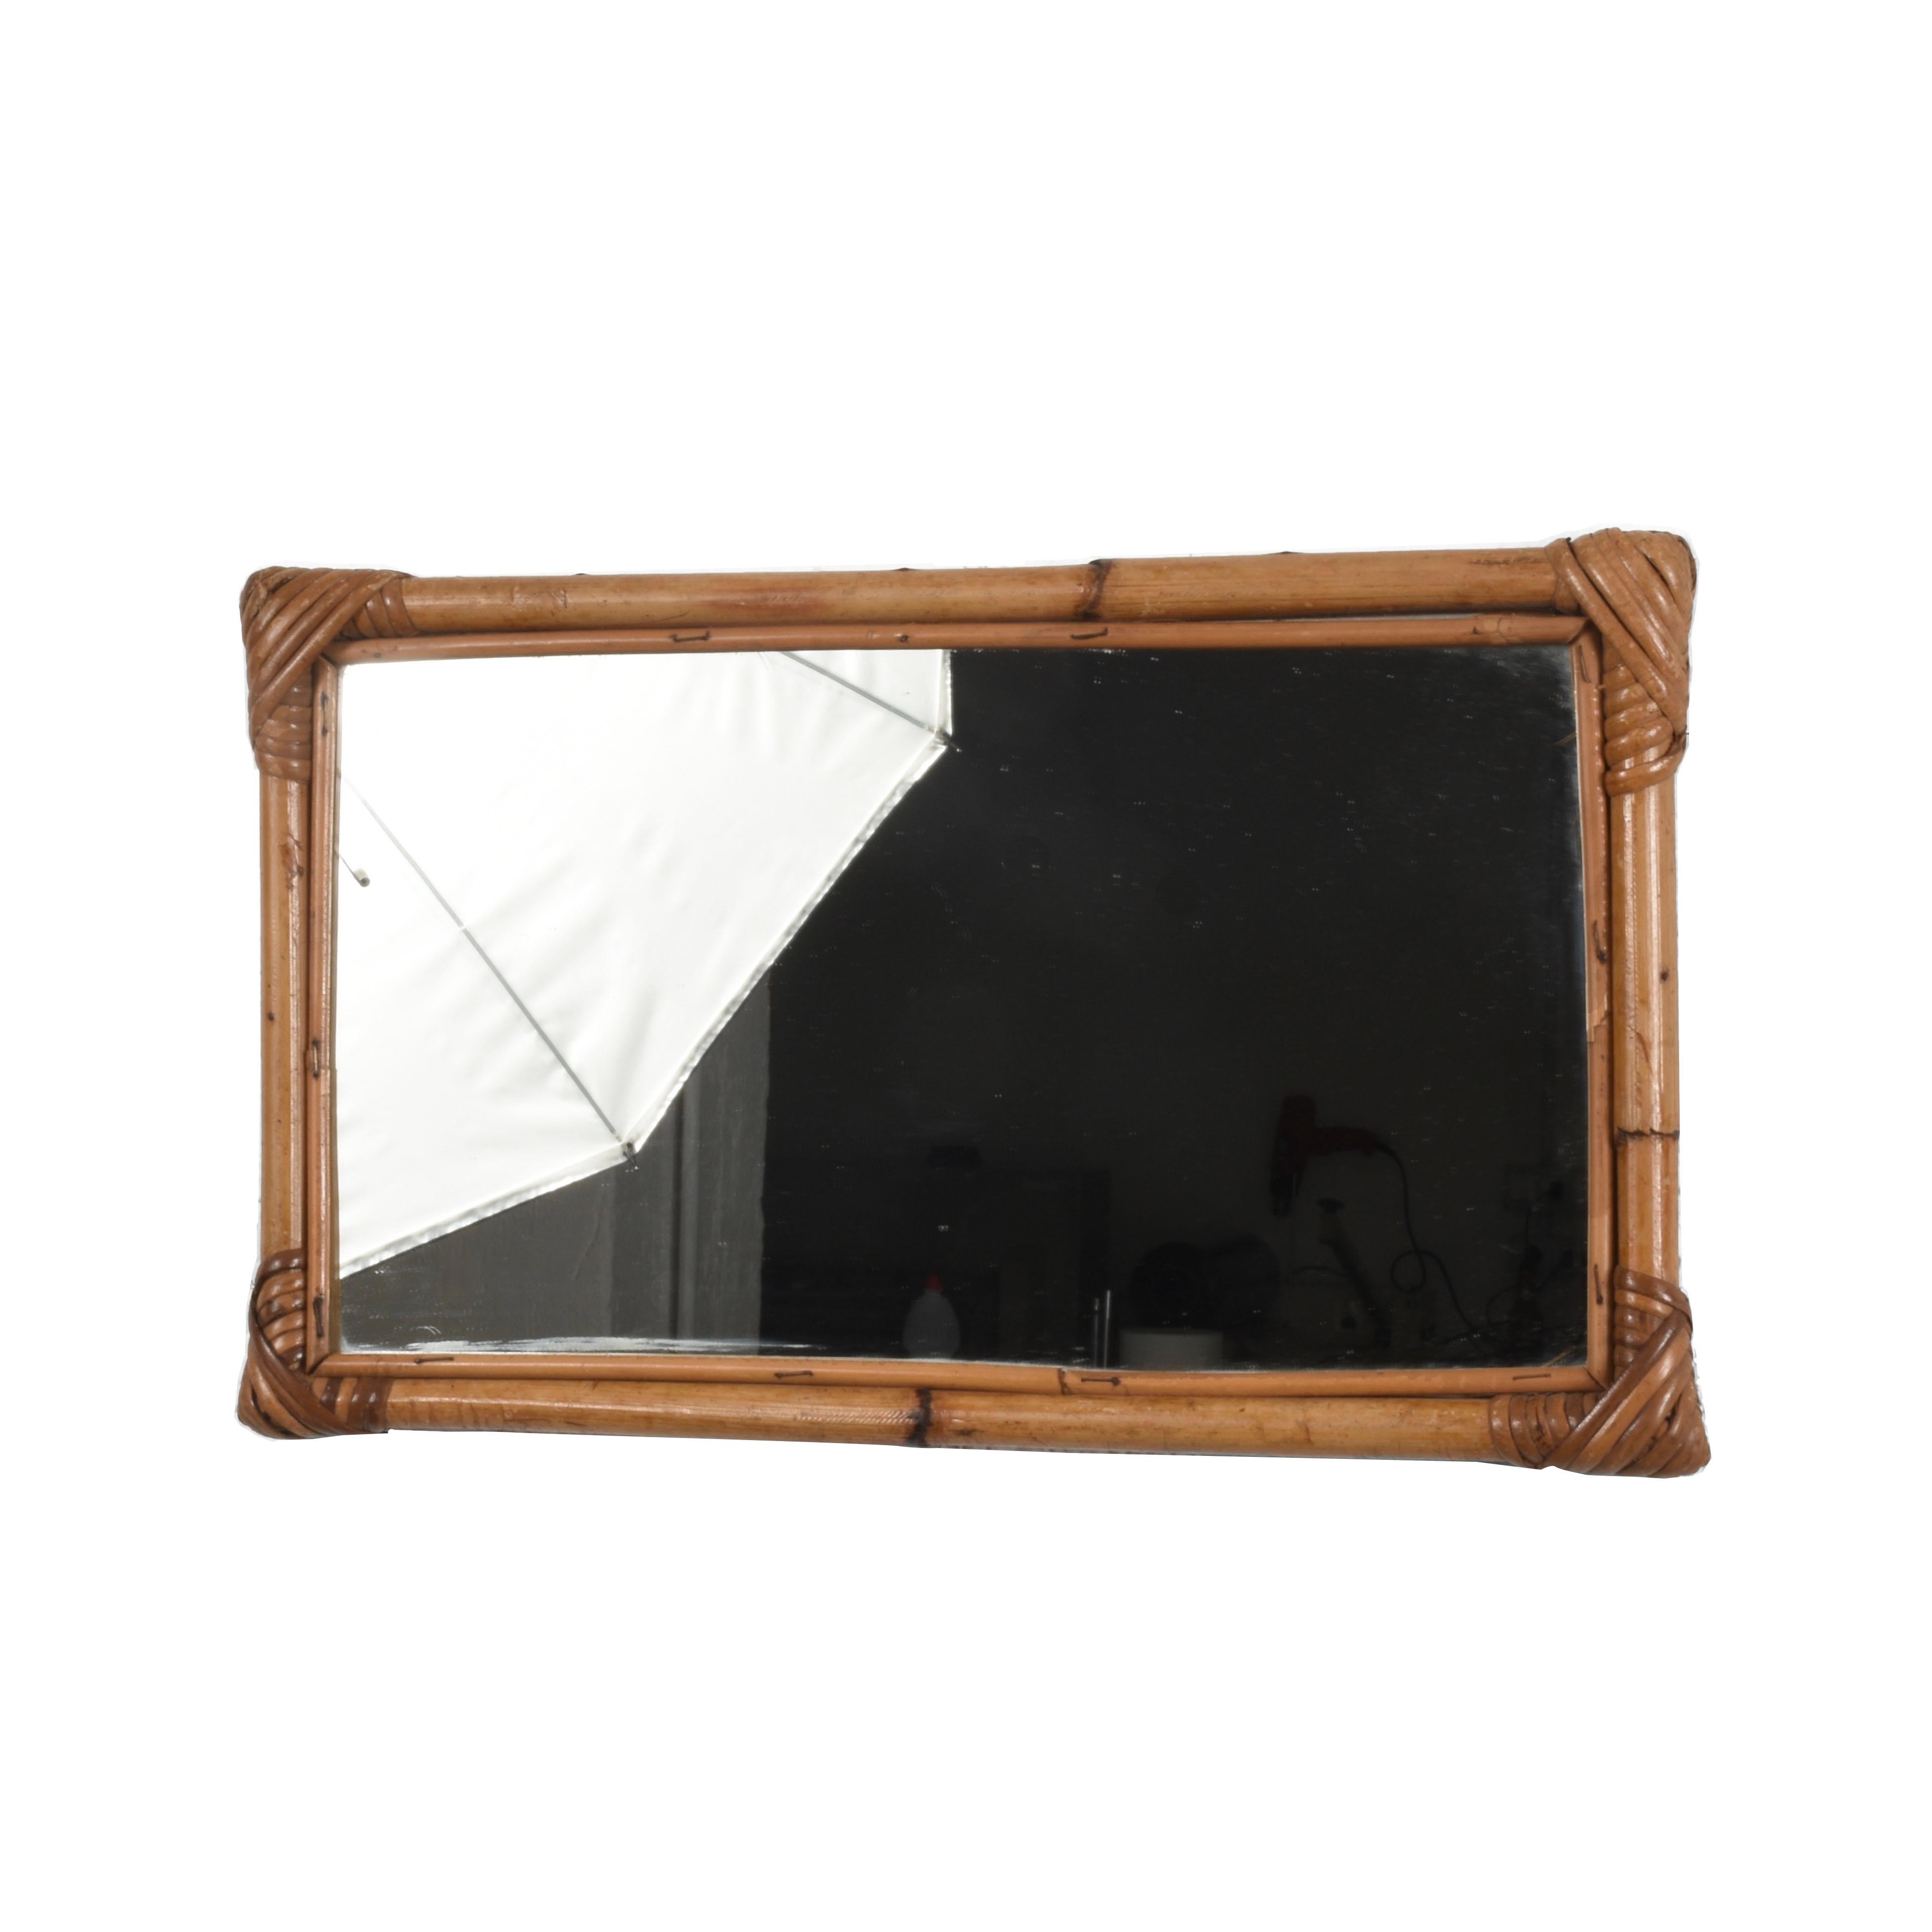 Marvelous midcentury rectangular mirror with double bamboo cane frame. This fantastic item was produced in Italy in the 1970s.

The way the straight lines of the bamboo integrate with the mirror. The corners, made of rattan and connecting the